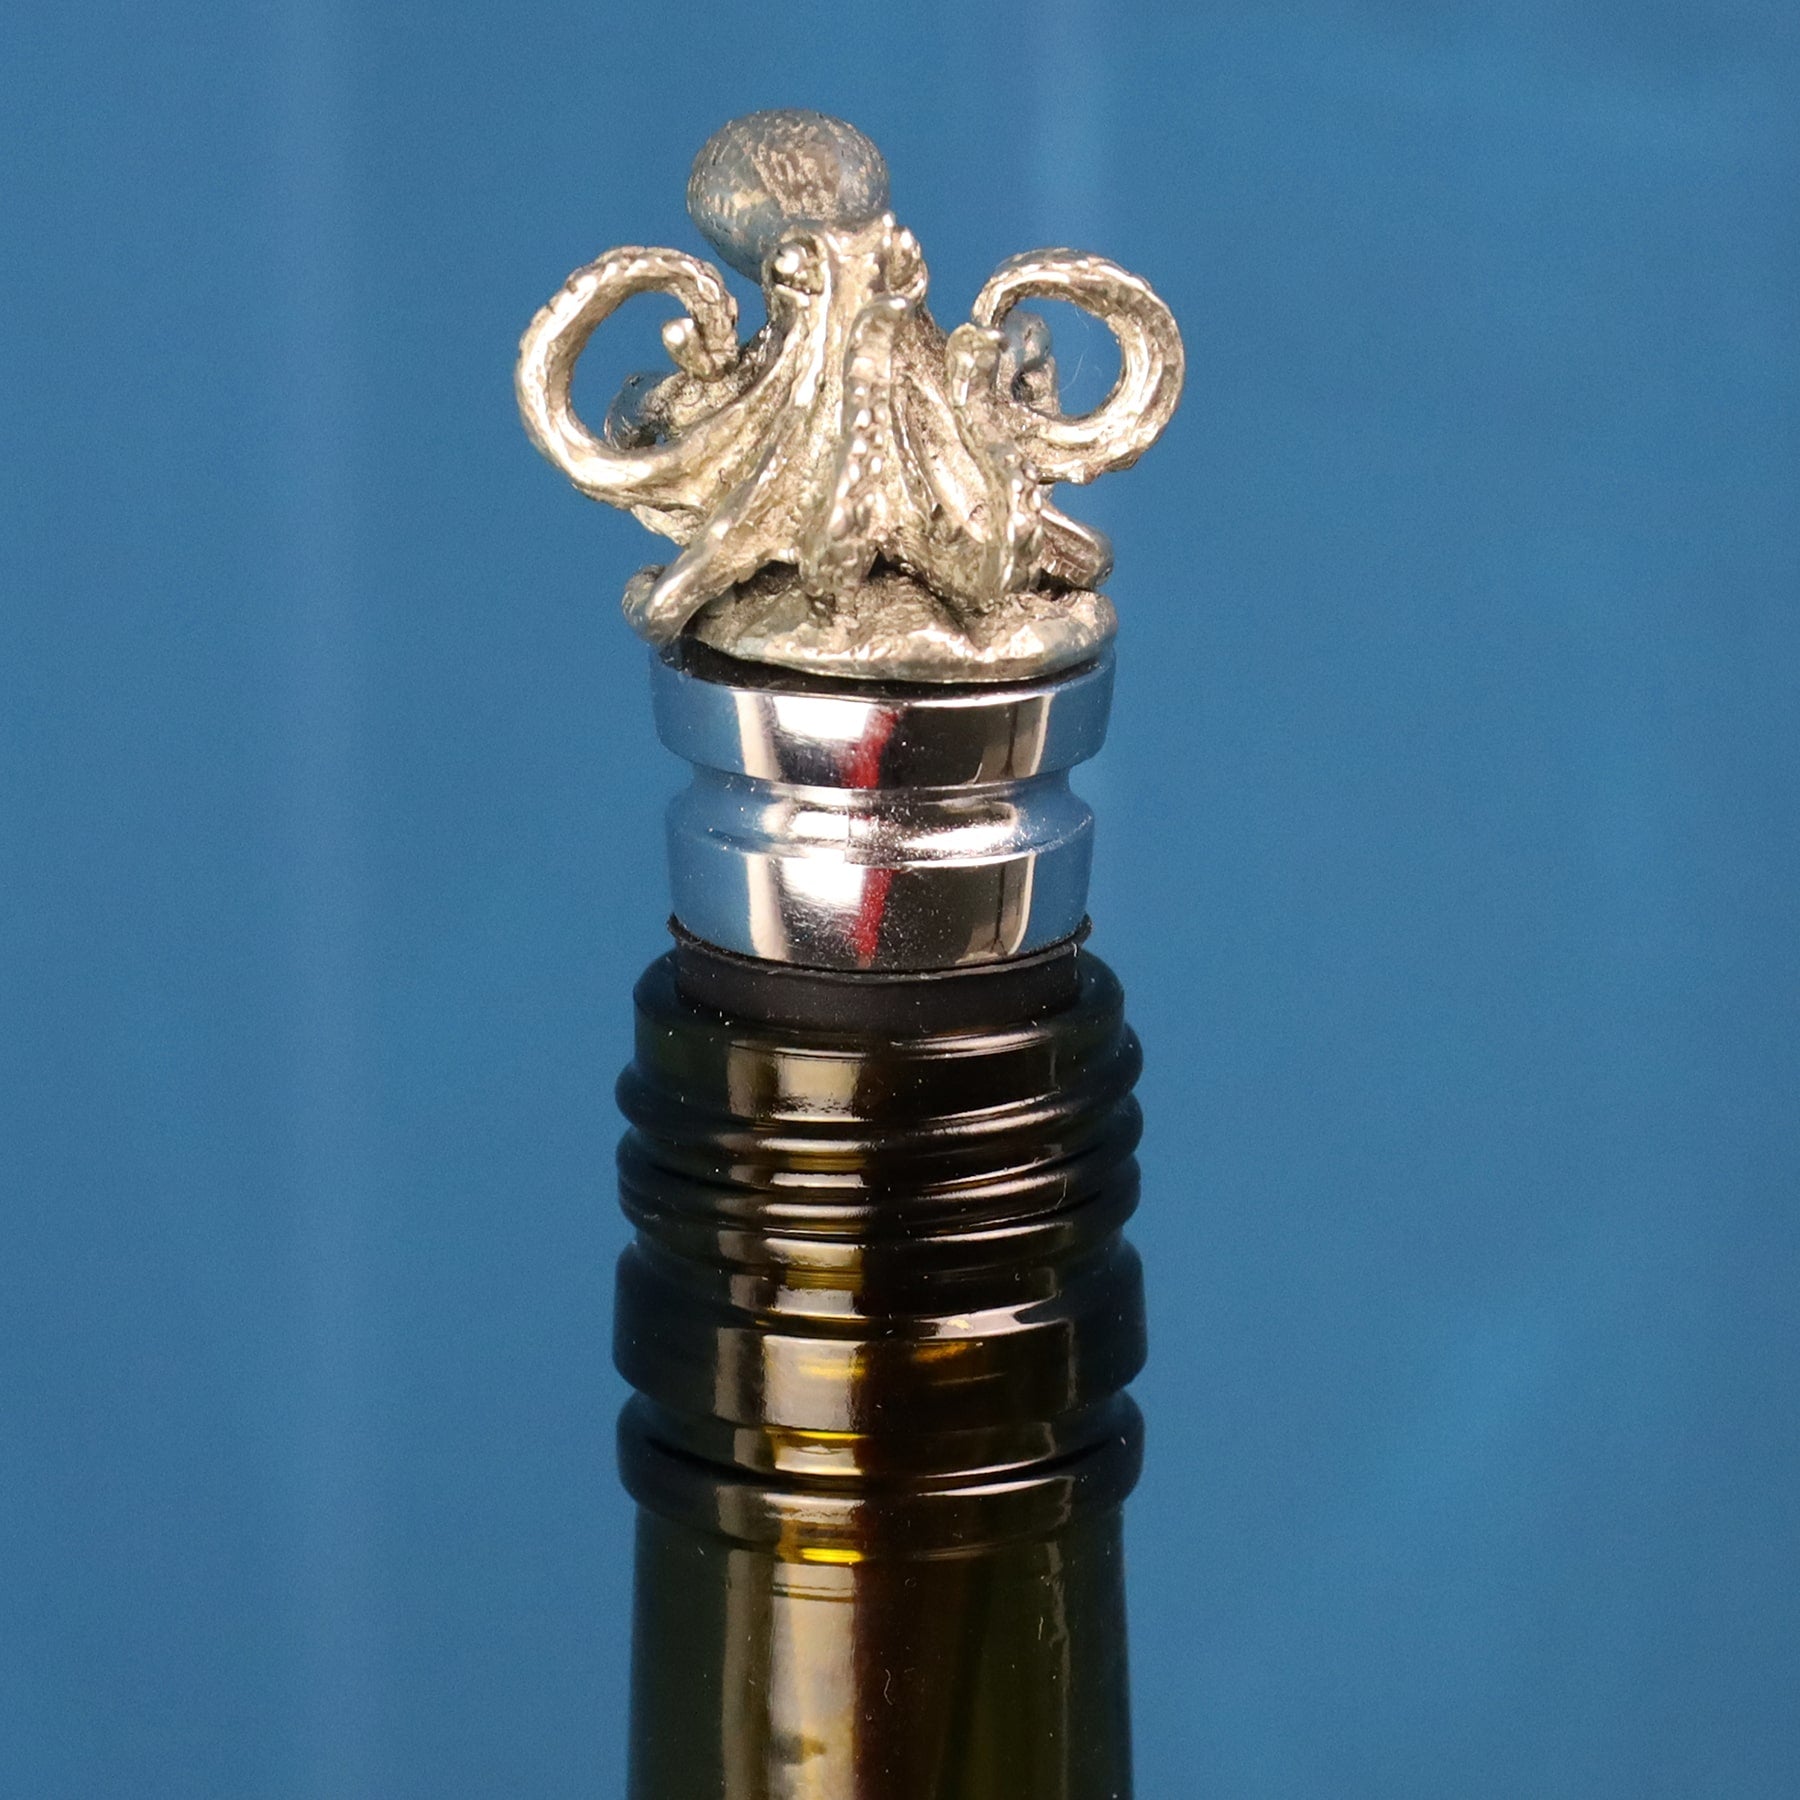 Pewter Octopus bottle stopper in the top of a bottle